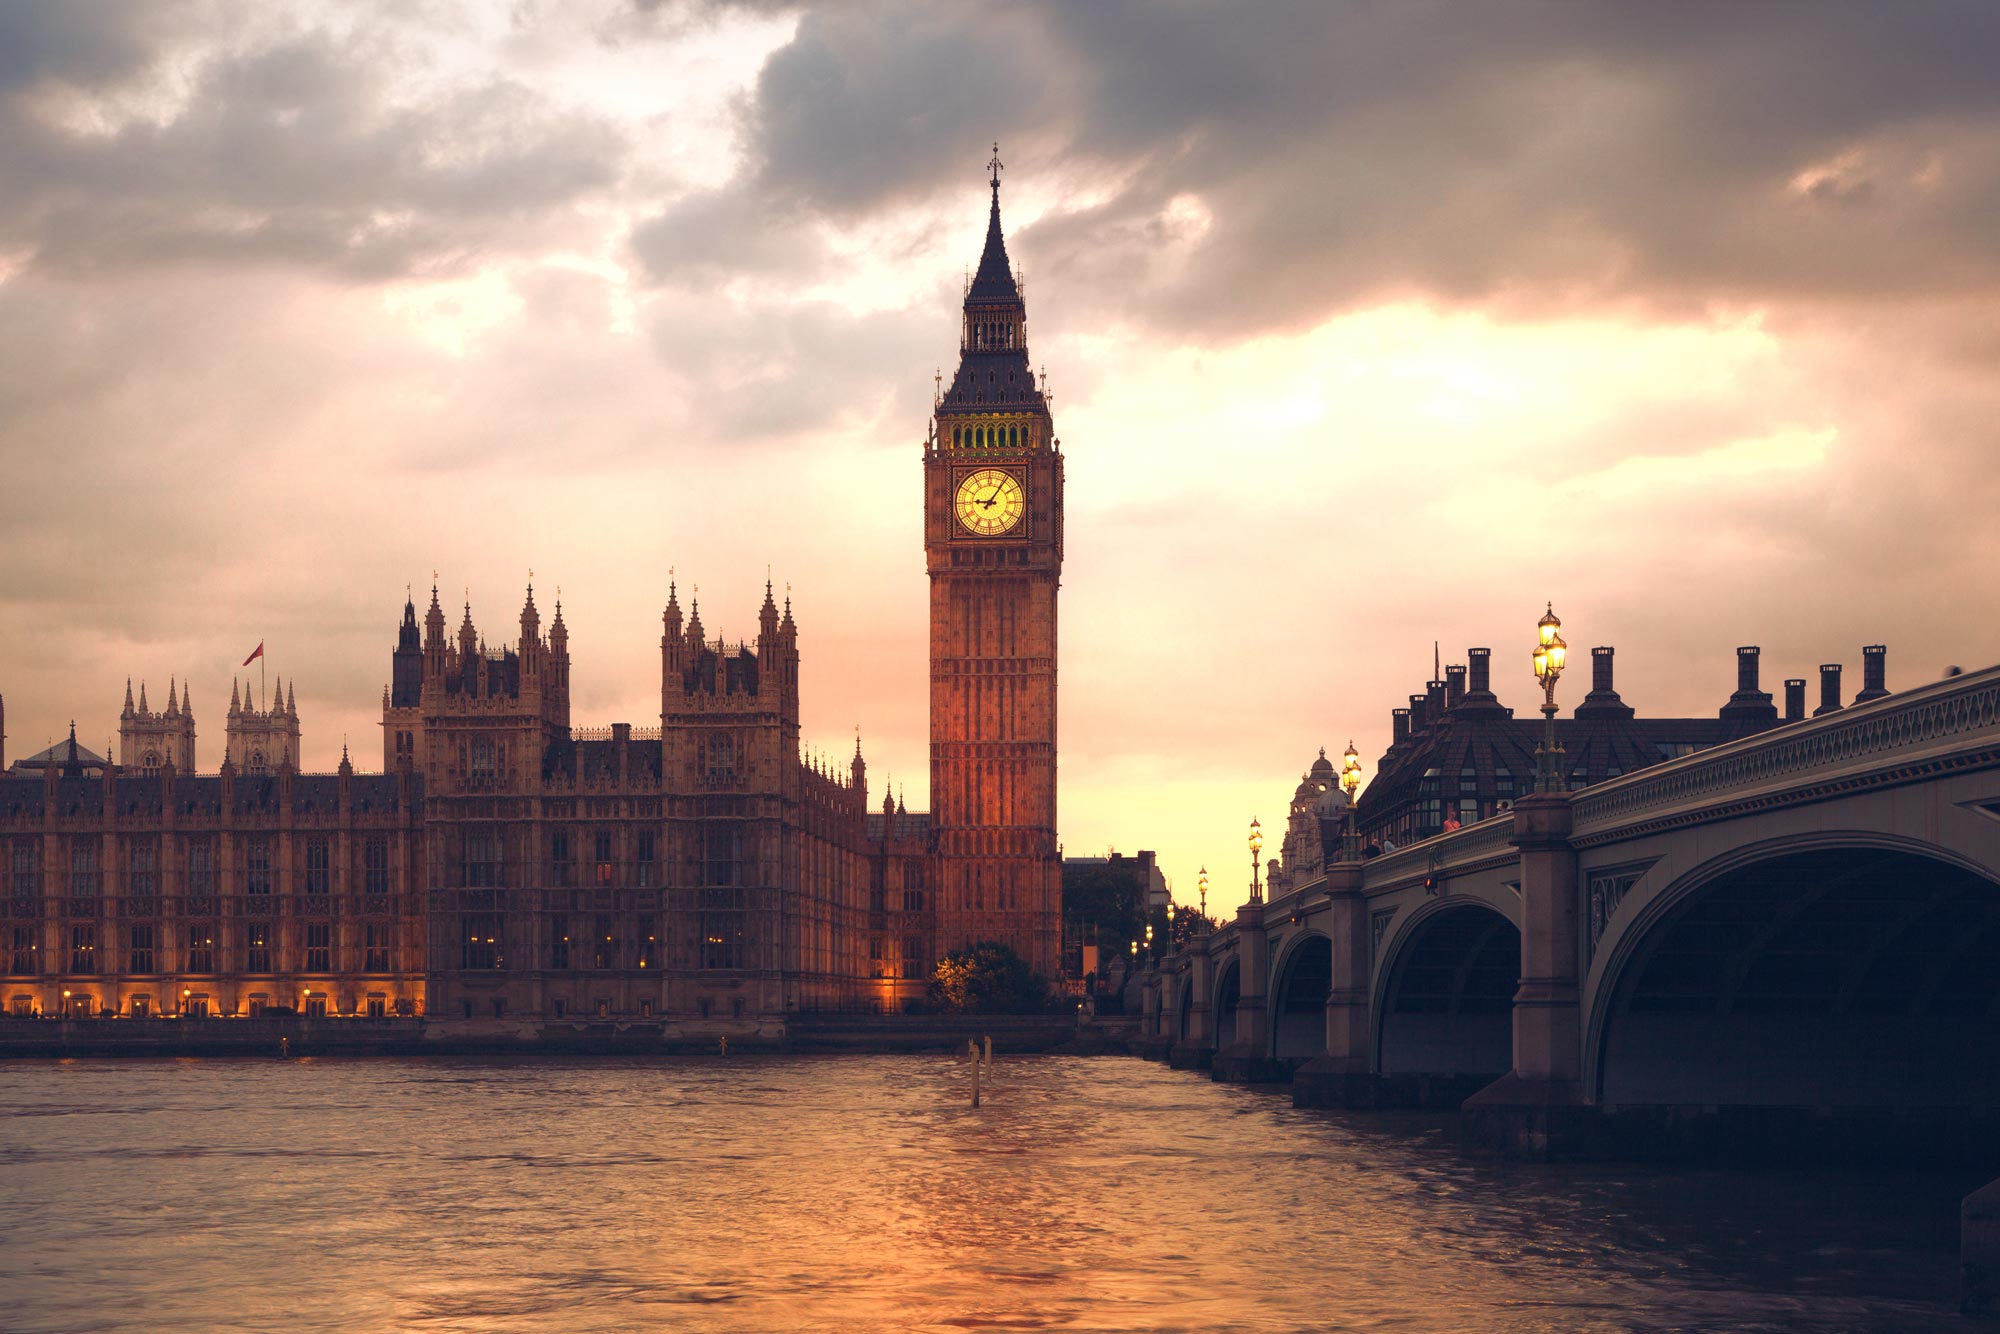 Big ben seen from the river as the sunsets and casts an orange glow upon it